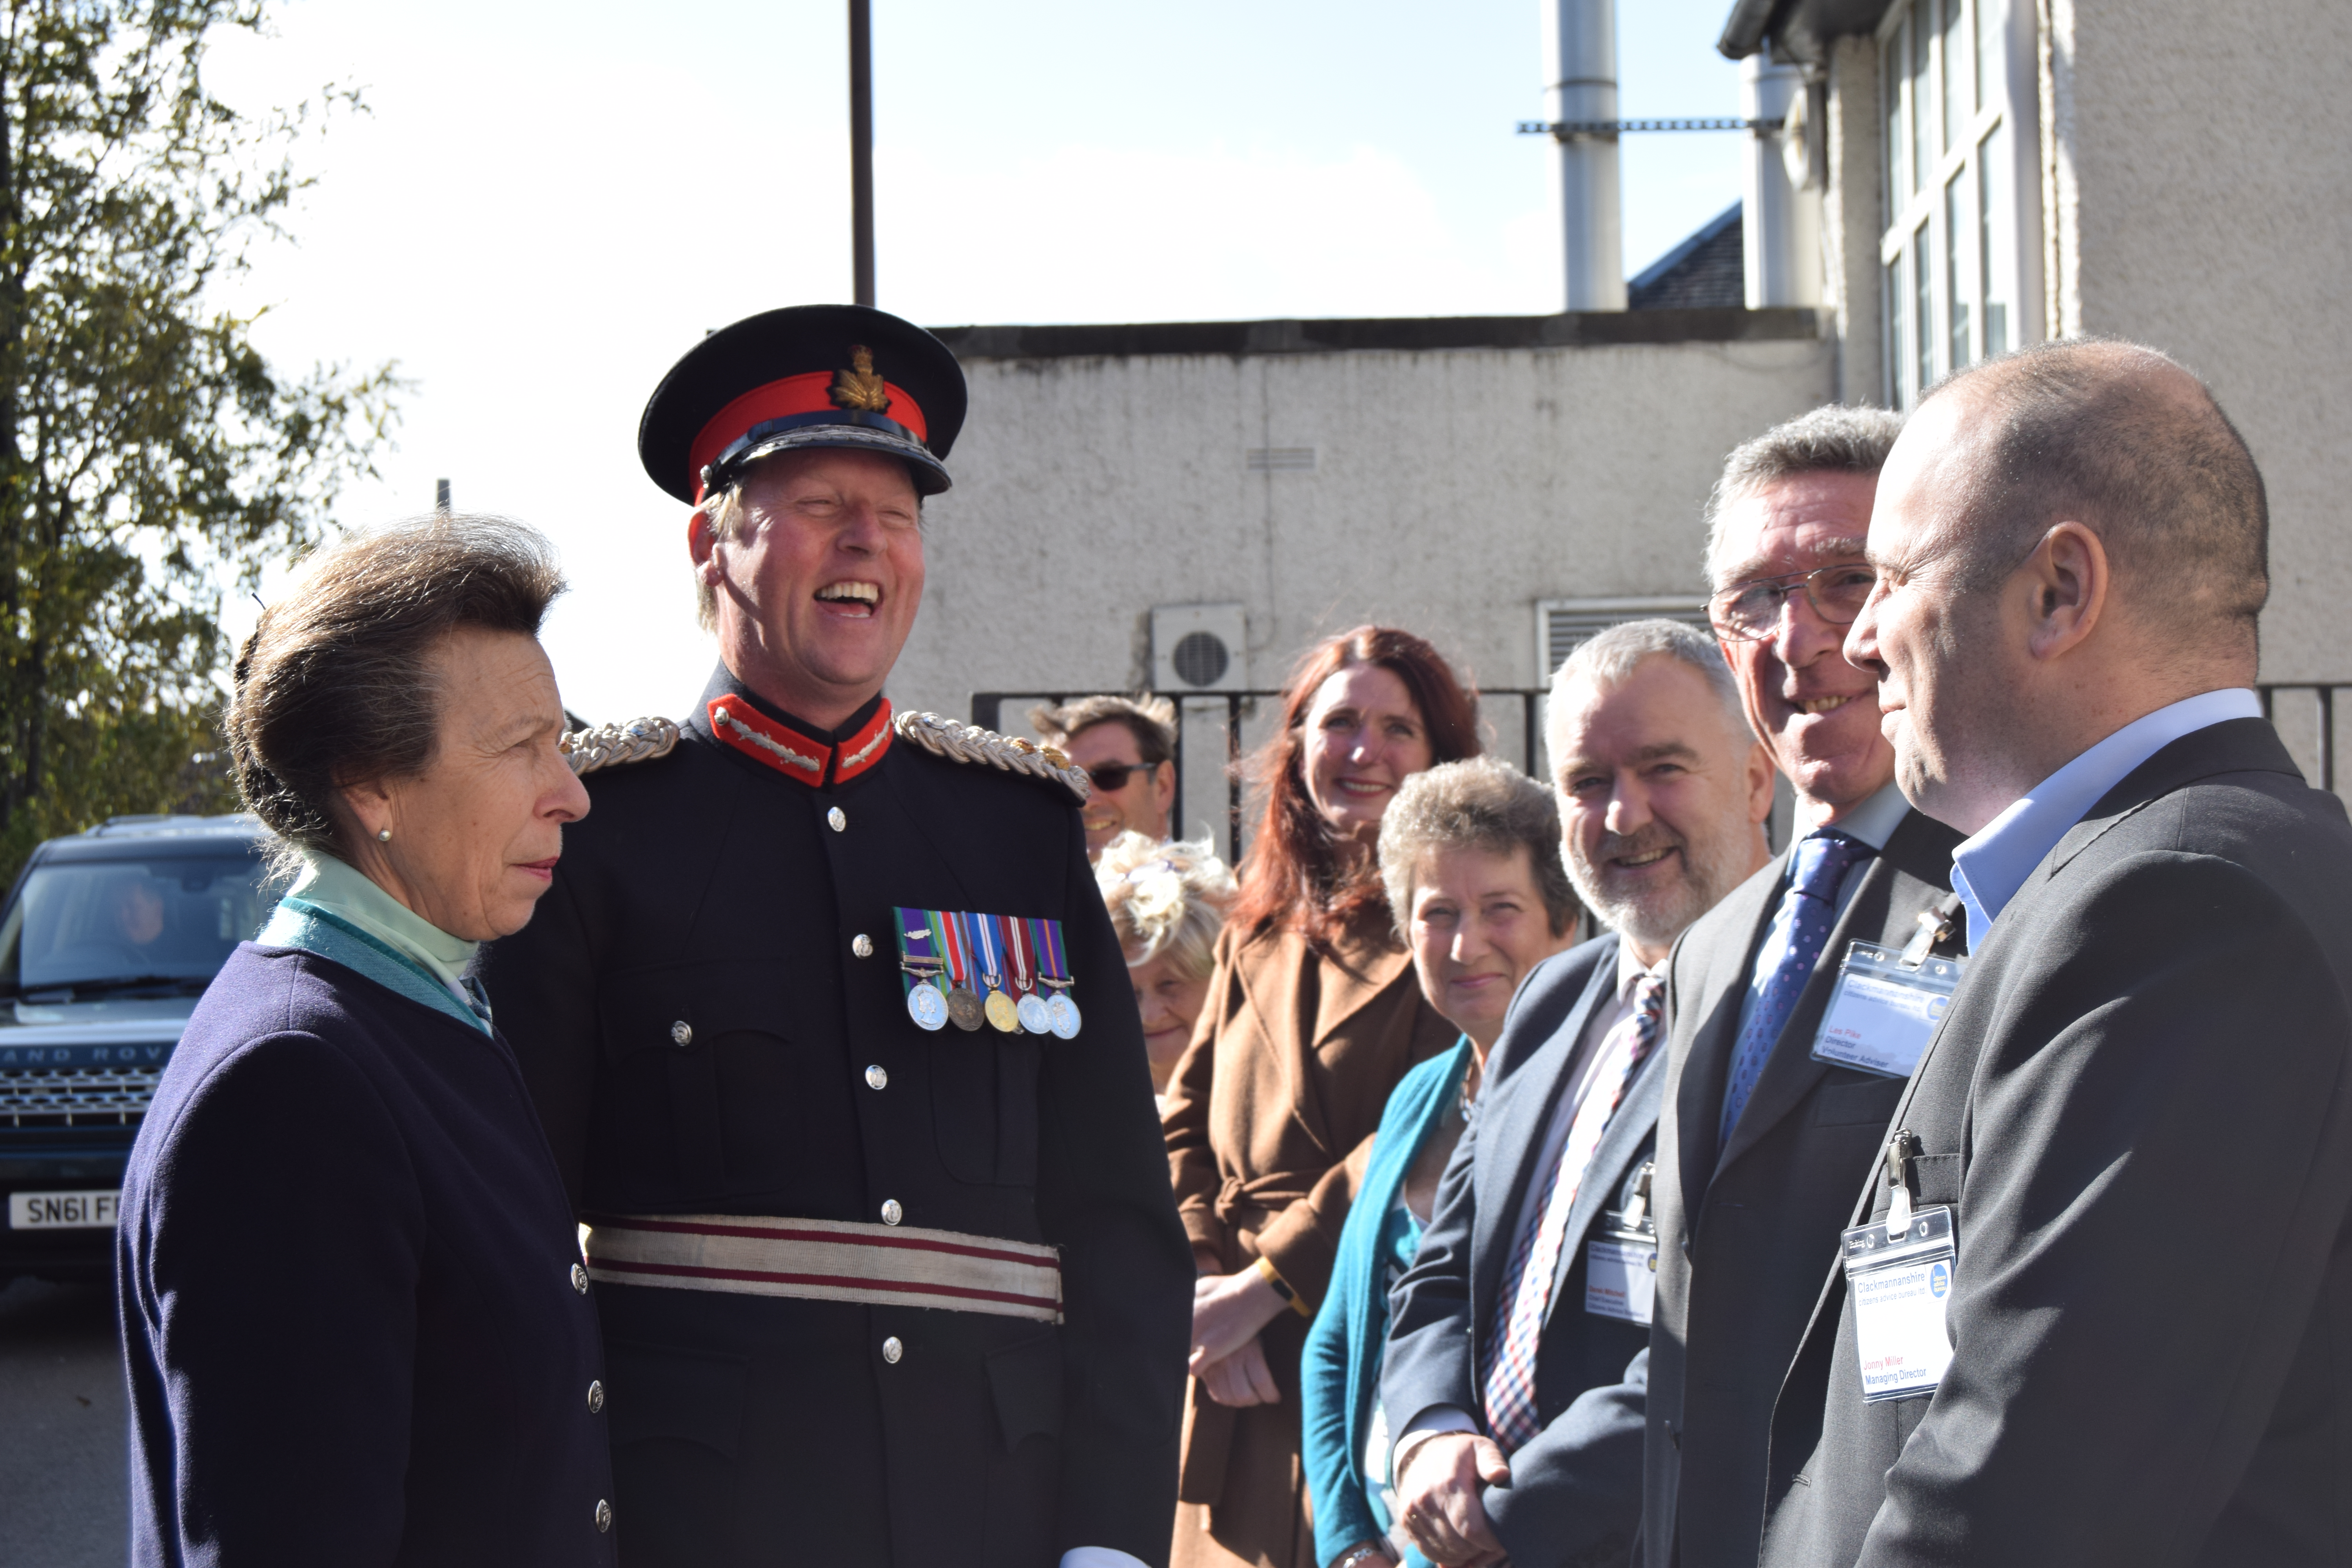 We are most certainly amused! Lord-Lieutenant Johnny Stewart with Her Royal Highness, The Princess Royal, introducing CAB Manager Jonny Miler and the other invited guests at the opening ceremony yesterday. Photo courtesy of the Alloa Advertiser.